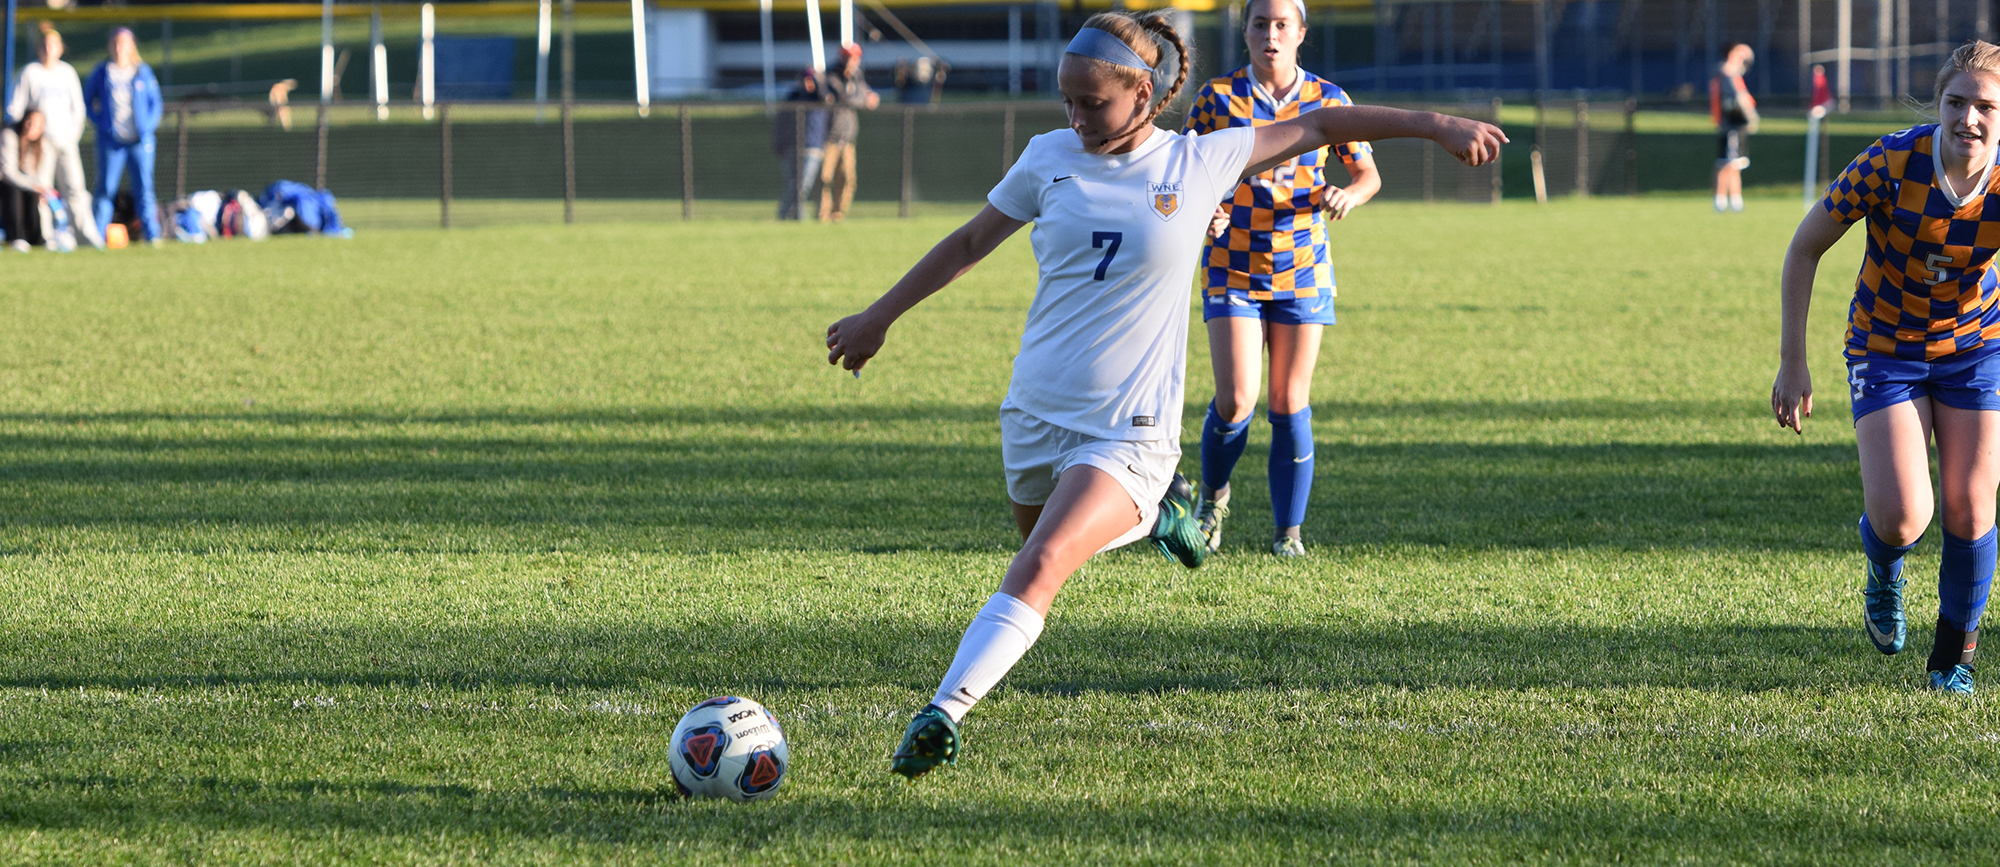 Sophomore Kaeli Serafino's first career goal was the difference in Western New England's 1-0 victory at Curry on Friday night.